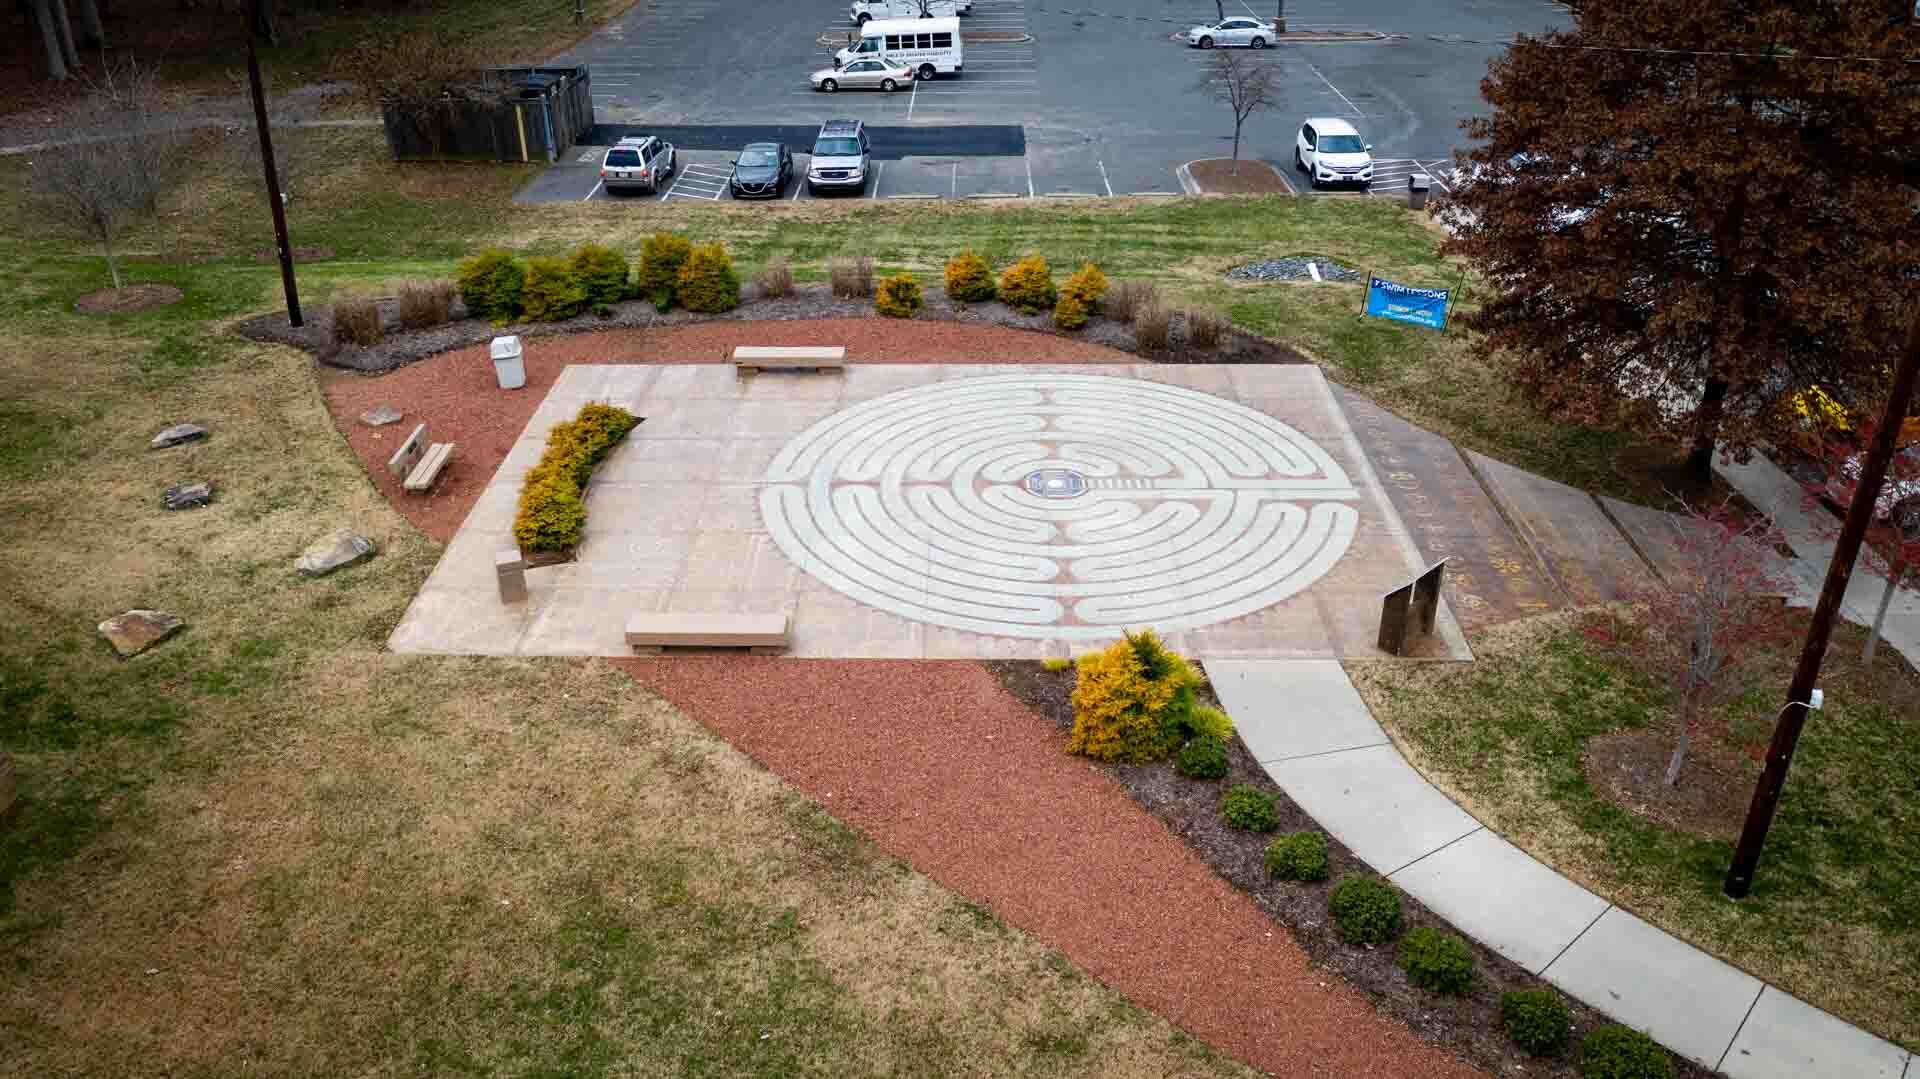 The Almetto Howey Alexander Labyrinth at the McCrorey Family YMCA is open and free for all